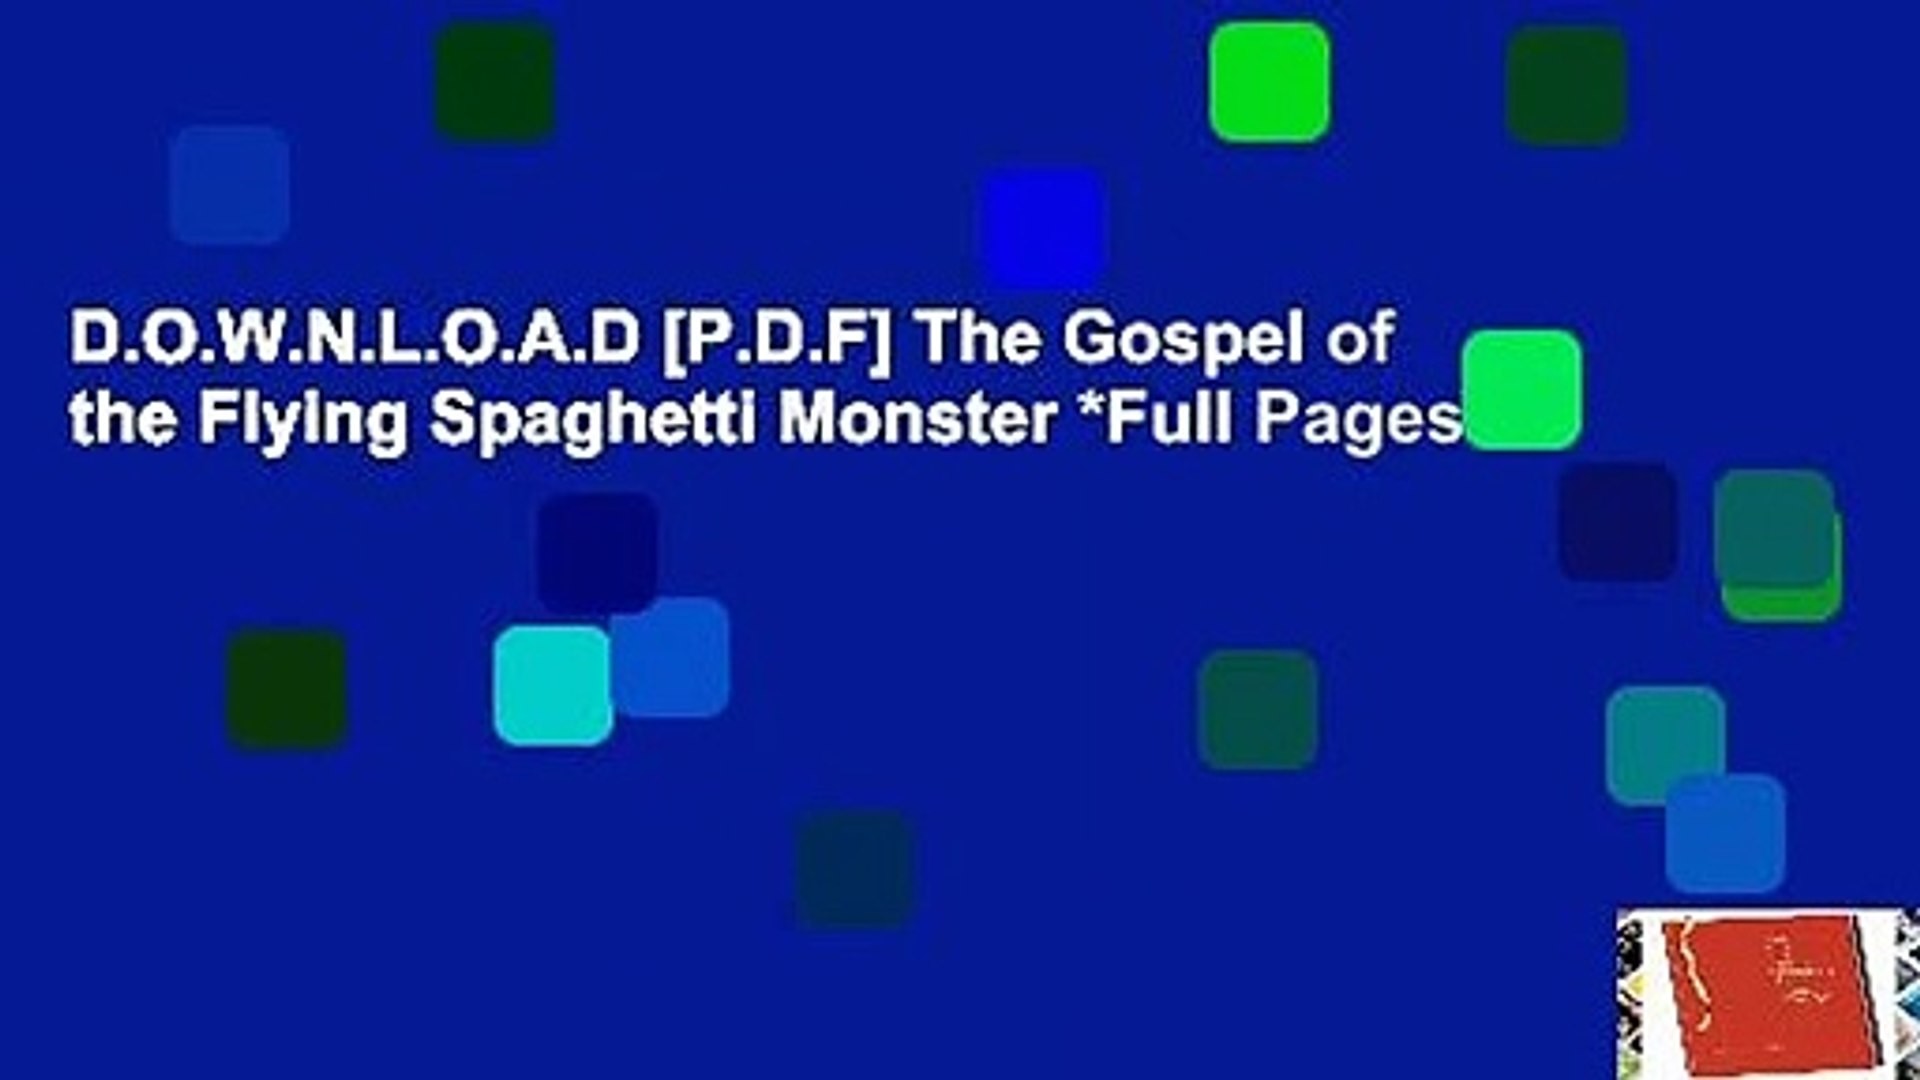 1920x1080 D.O.W.N.L.O.A.D [P.D.F] The Gospel of the Flying Spaghetti Monster *Full  Pages*